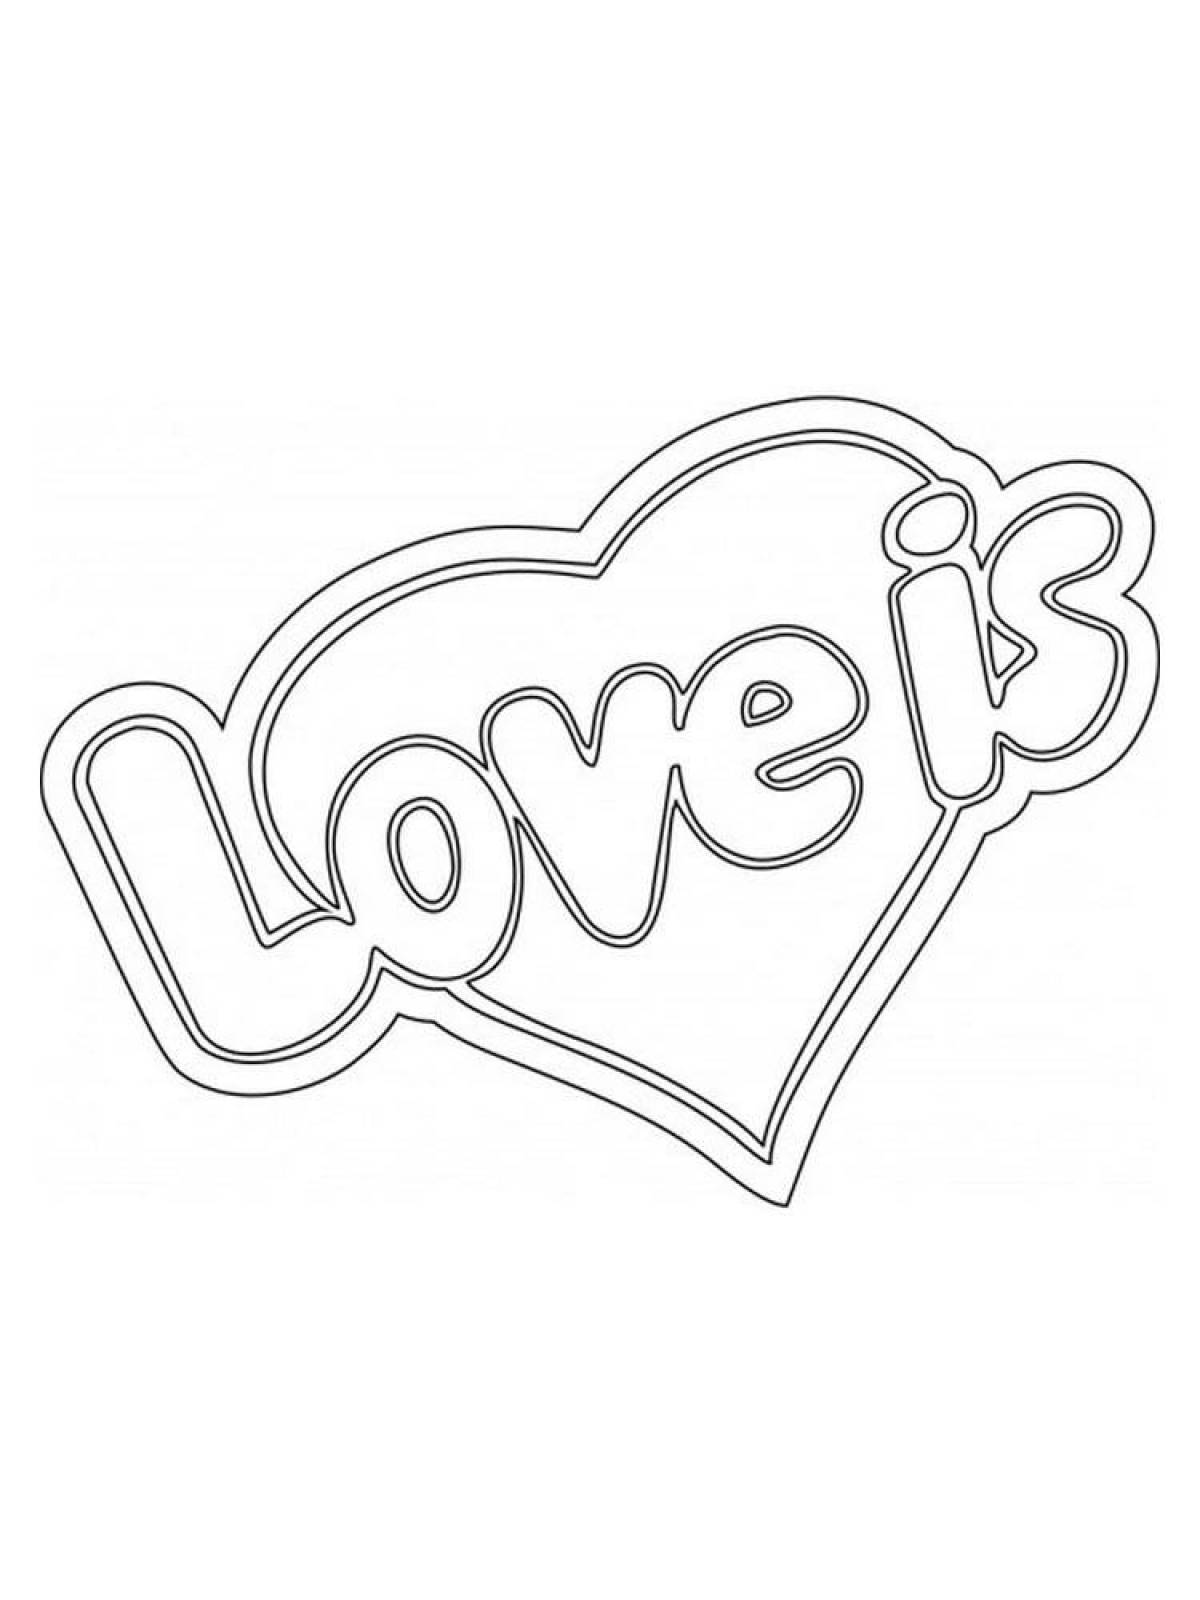 Charming love coloring page